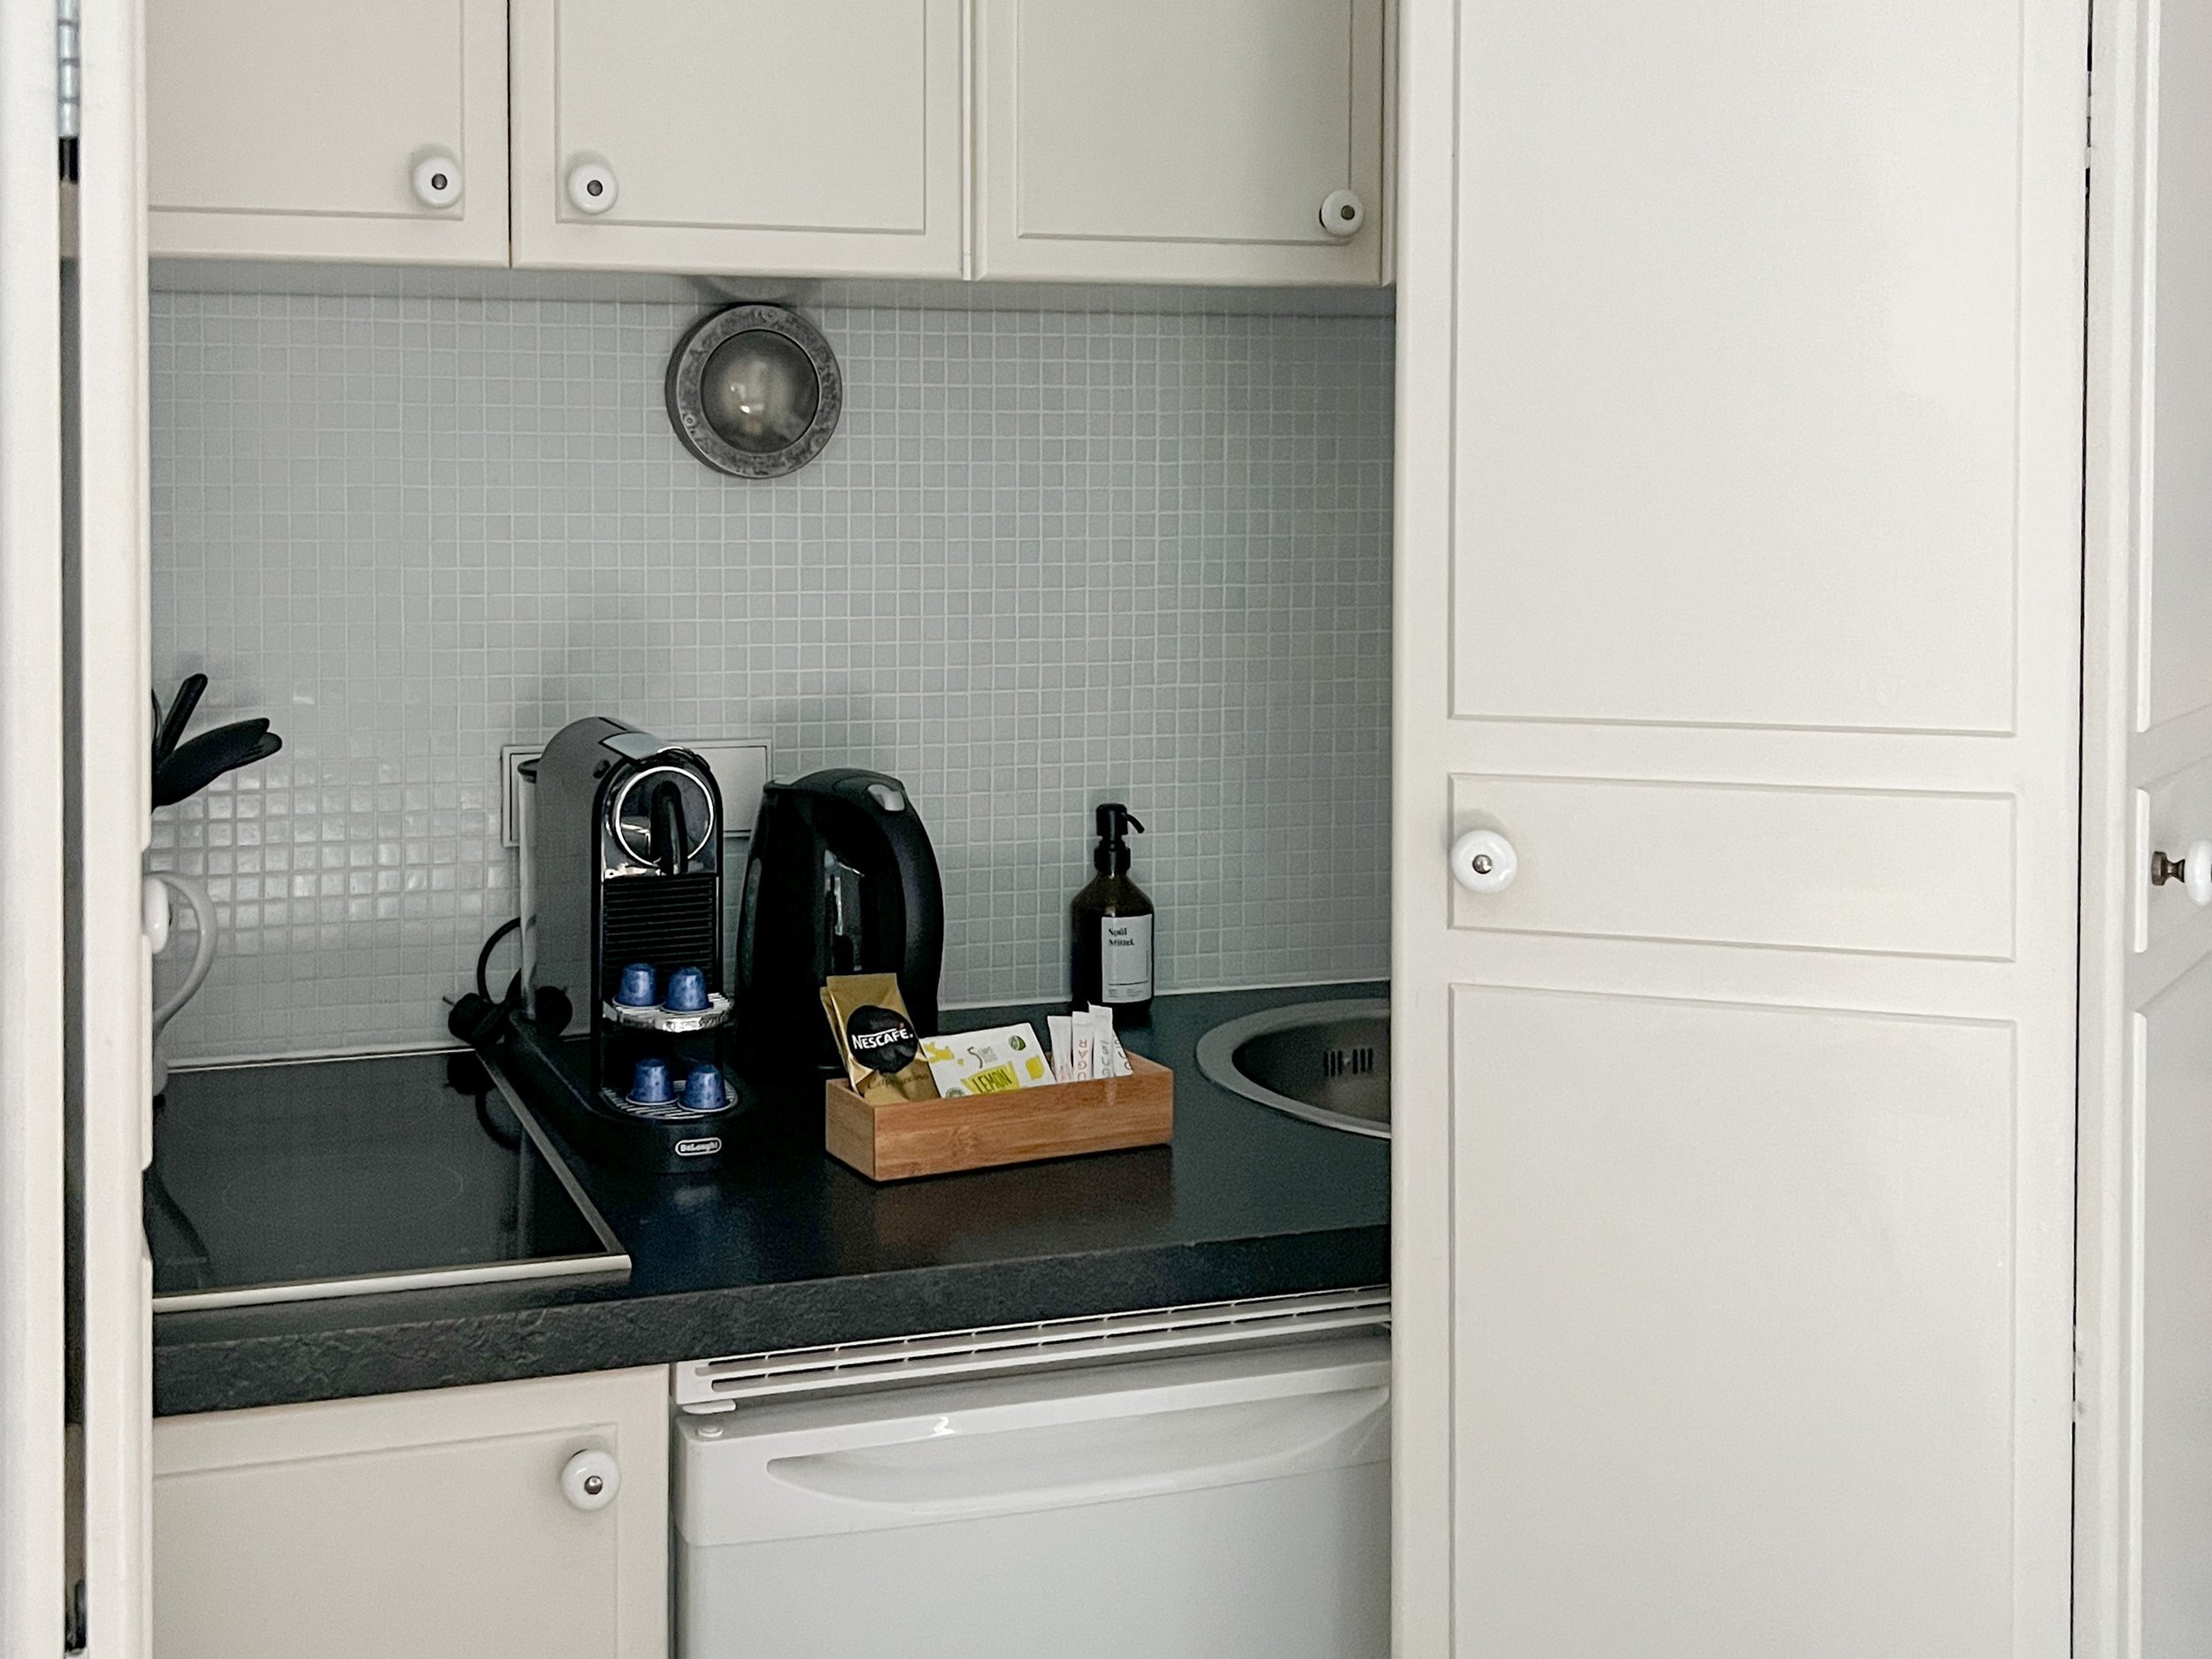 Example: A lovely little Kitchenette is part of the our Little One + apartments